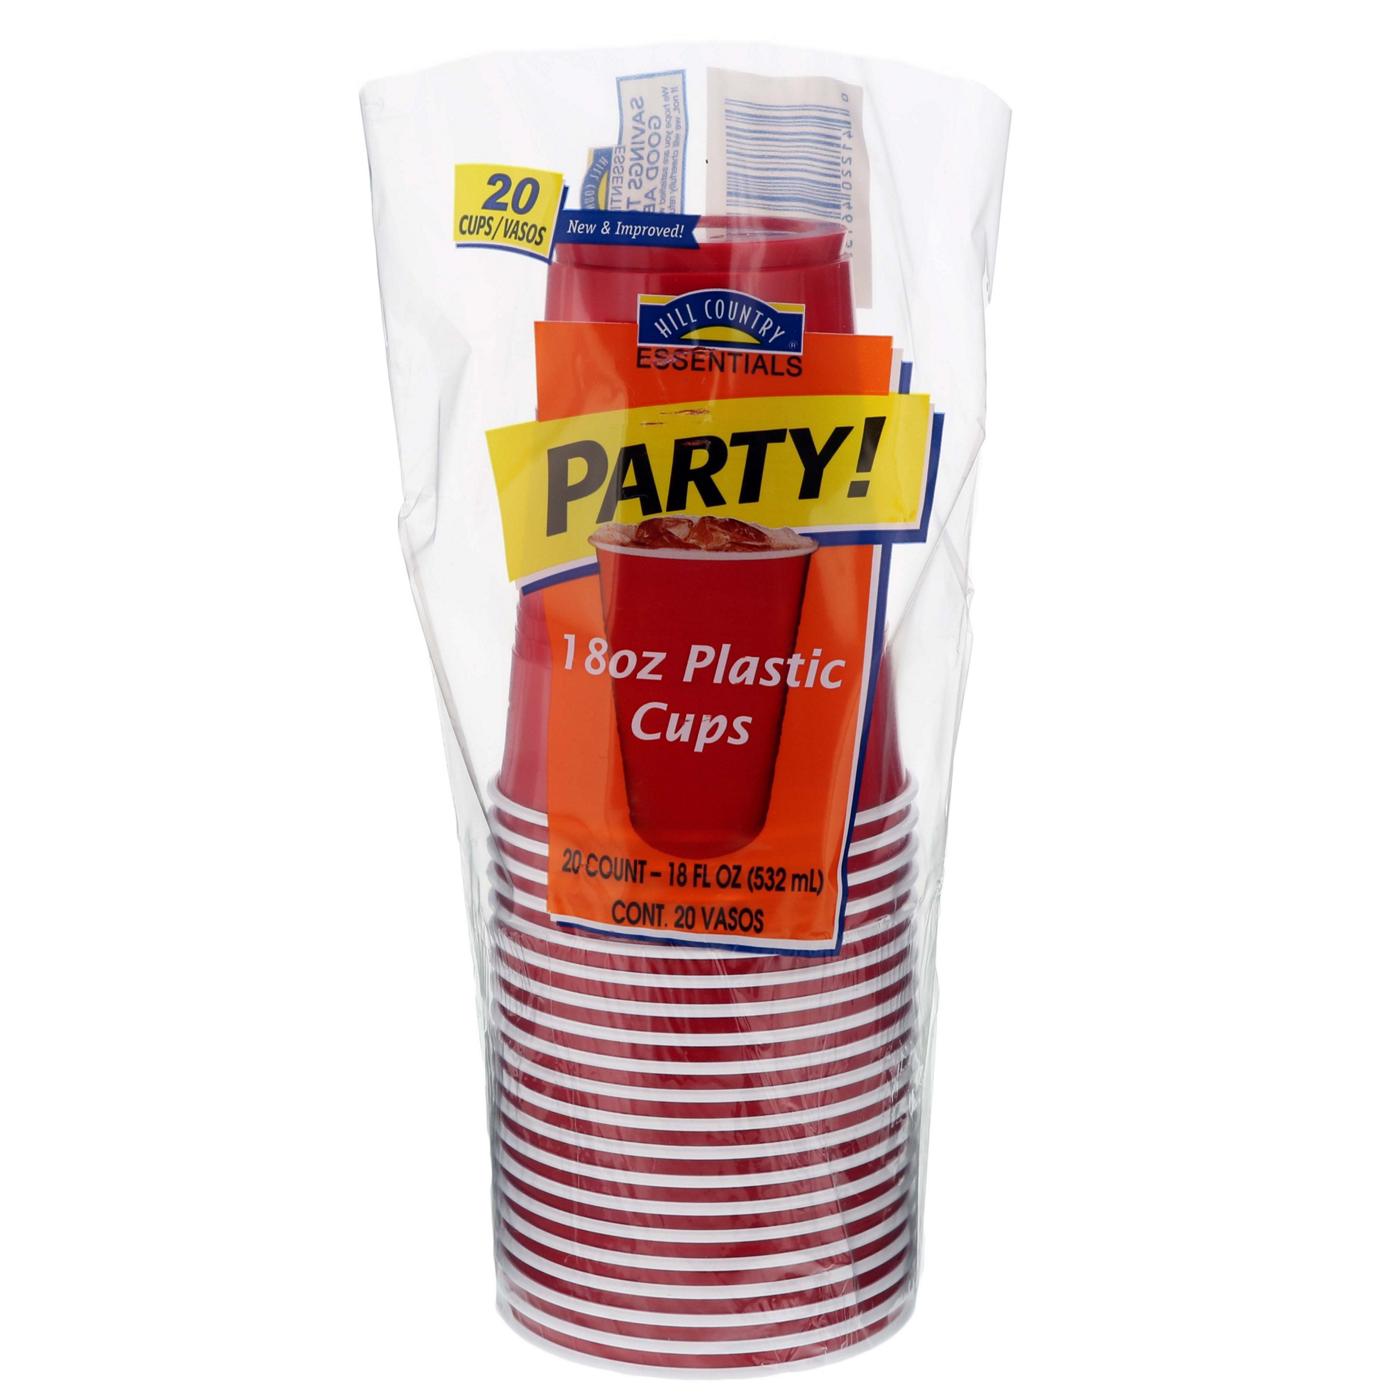 Hill Country Essentials Party 18 oz Plastic Cups; image 1 of 2